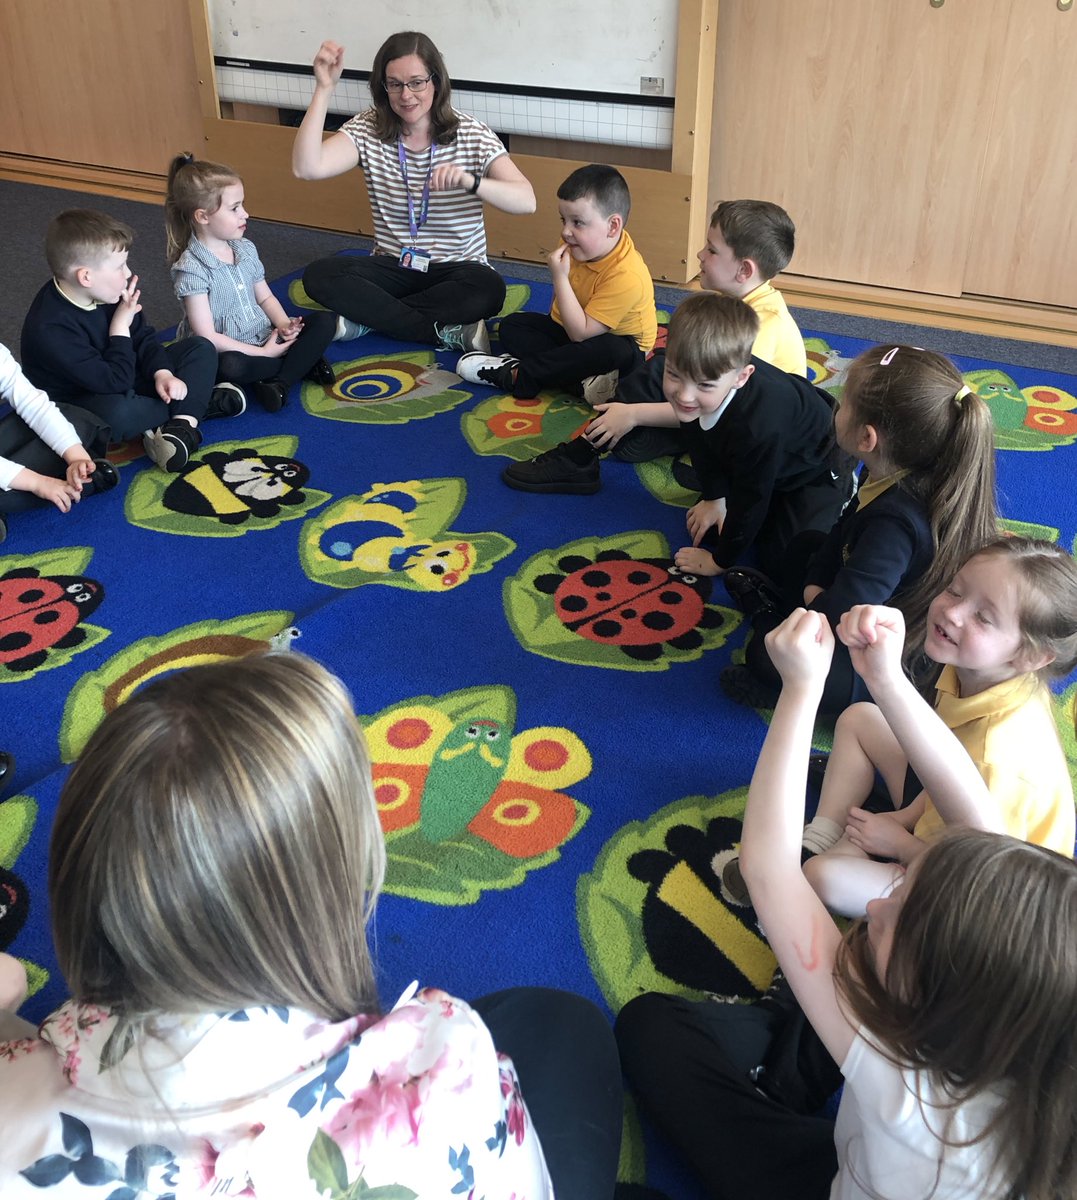 A snapshot from our Primary 1 YMI Music programme this week - amazing to see the progress in beat, rhythm and pitch skills across the full year! Thanks @camstraddenps @LangsidePri @nicolastevens0n @MurrayMarrian 🎶